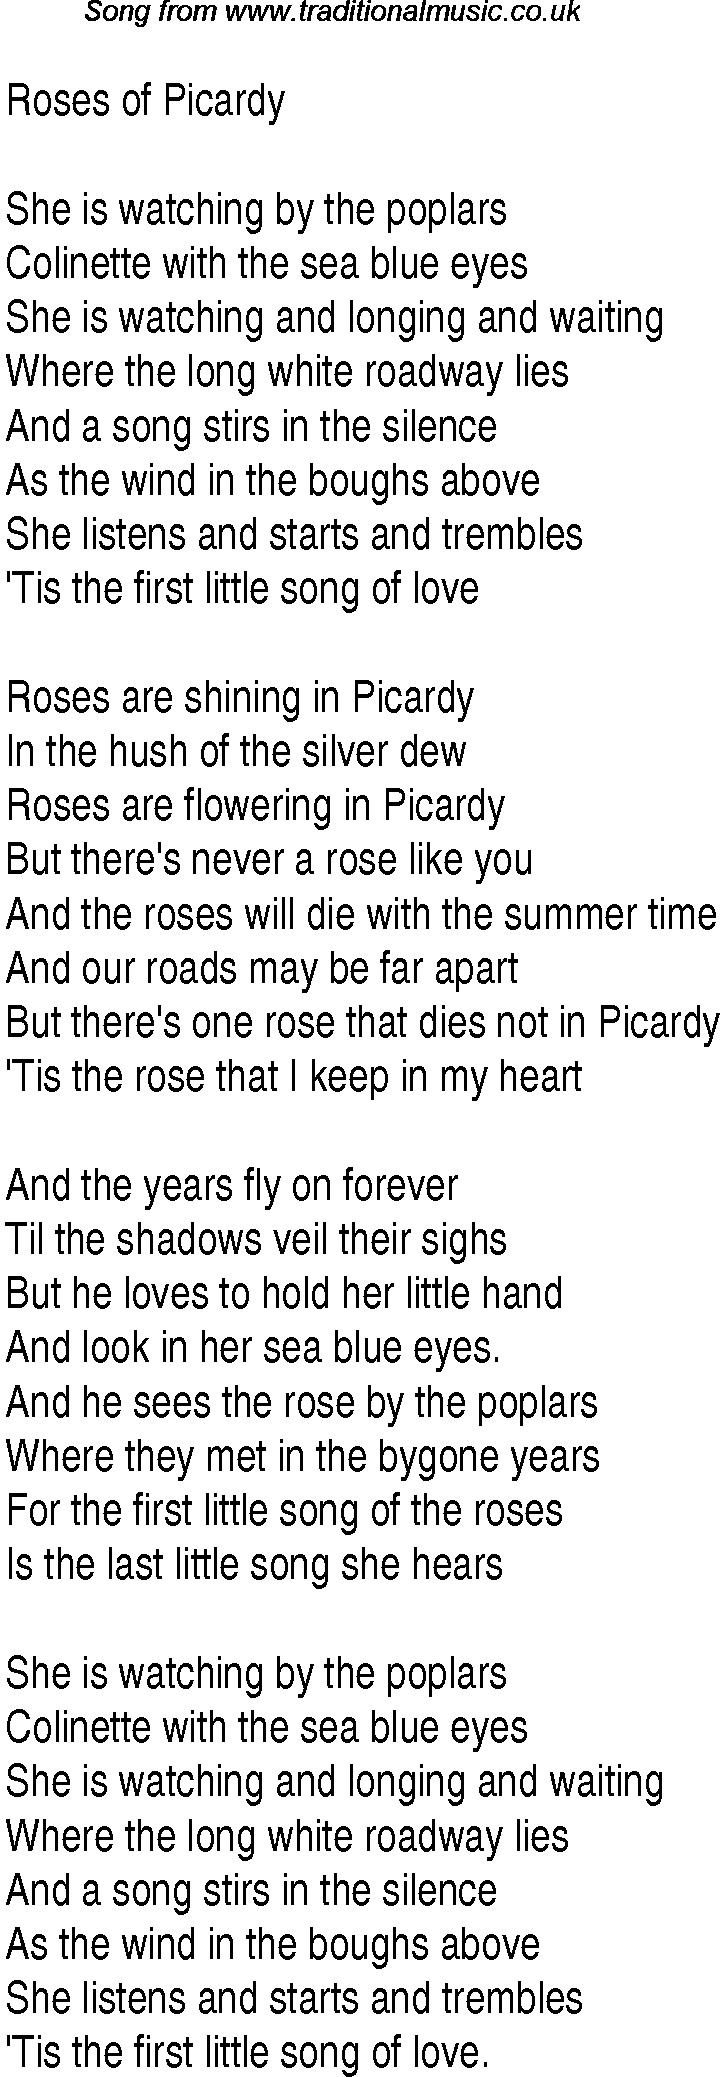 1940s Top Songs: lyrics for Roses Of Picardy
